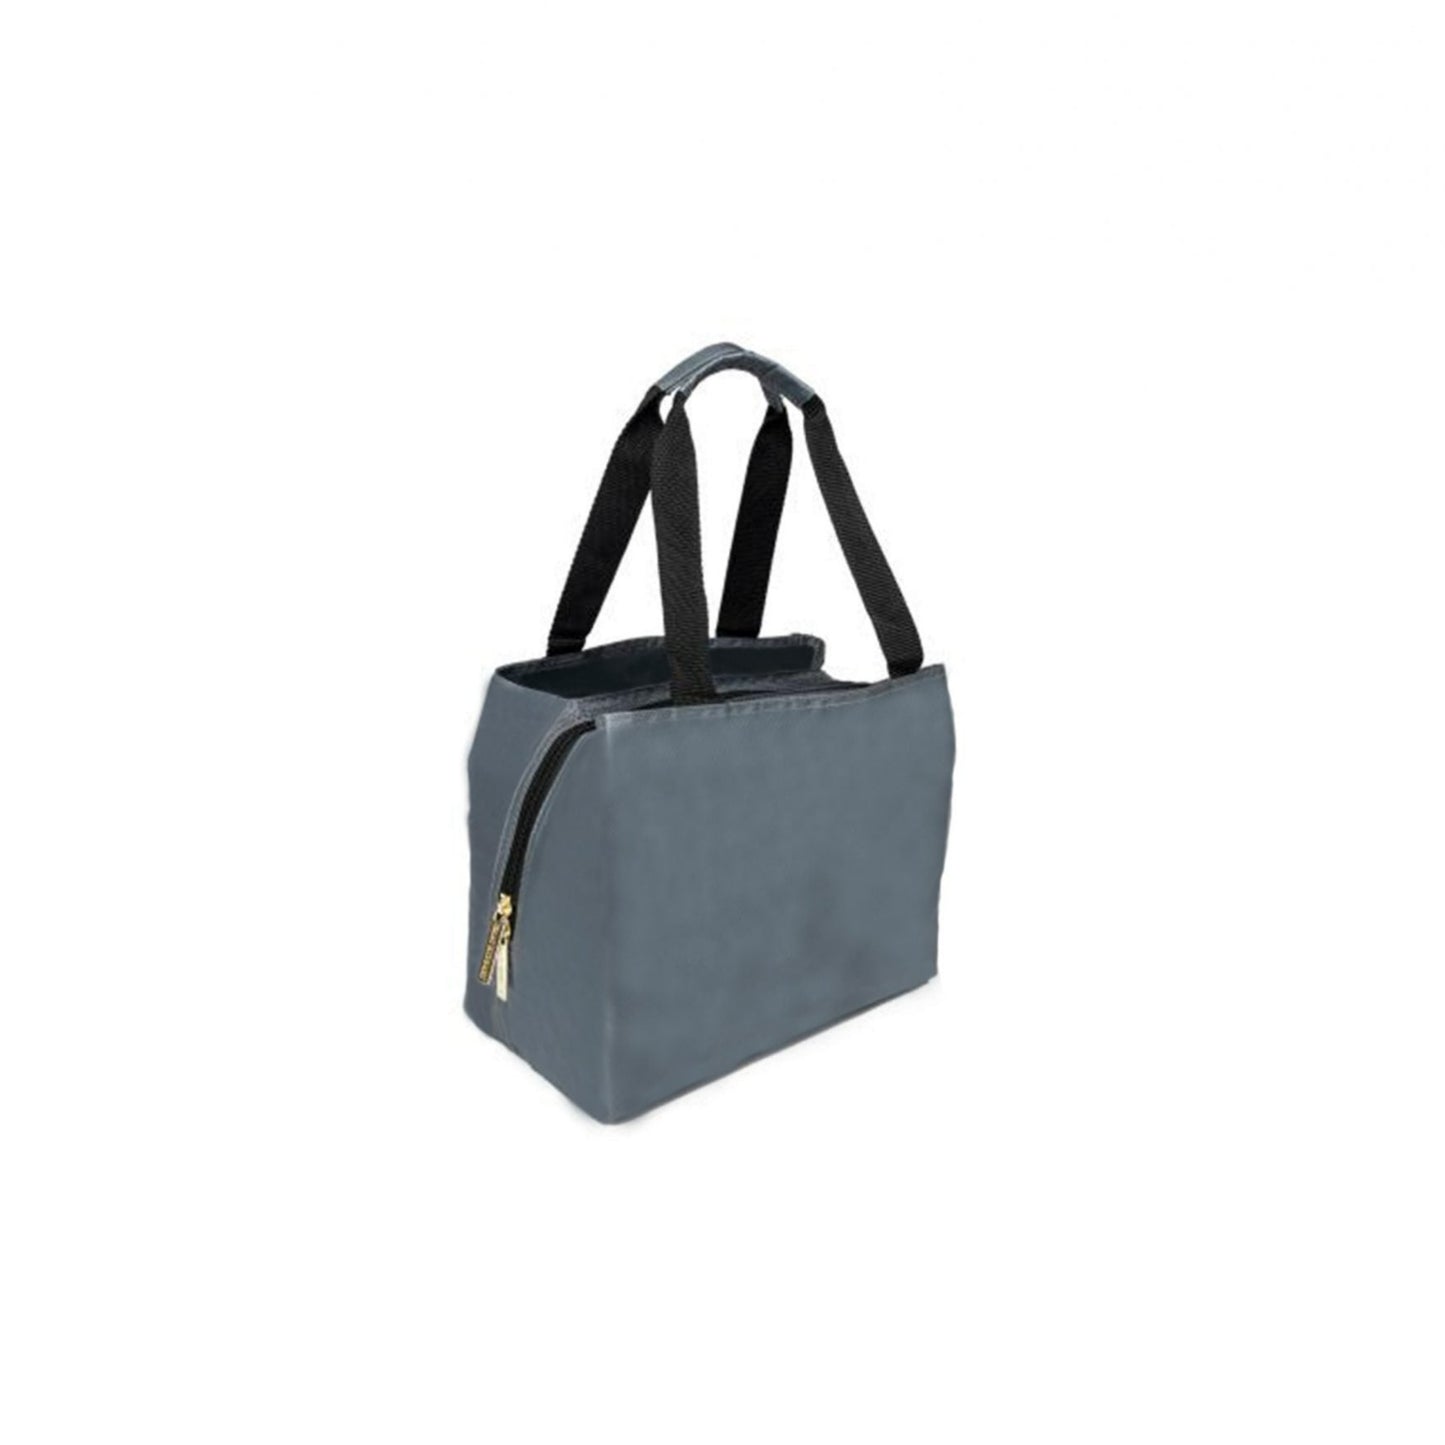 Isaac Mizrahi Vesey Deluxe Shopper Lunch Tote